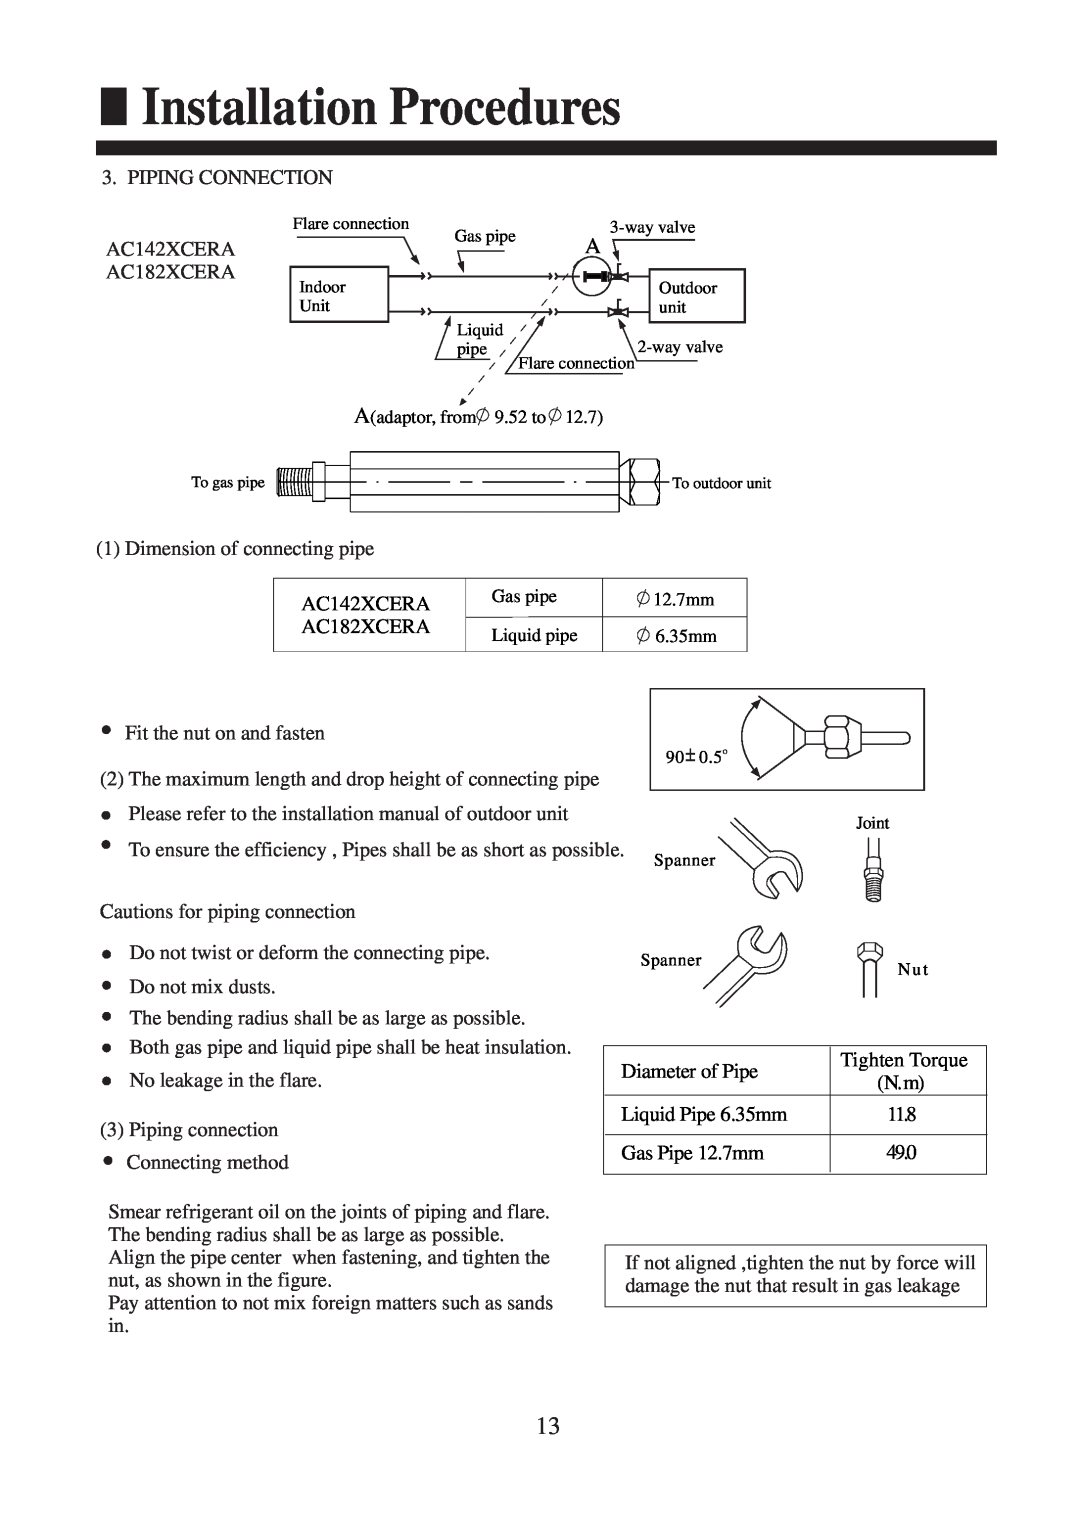 Haier AC142XCERA, AC182XCERA operation manual Installation Procedures, Piping Connection 